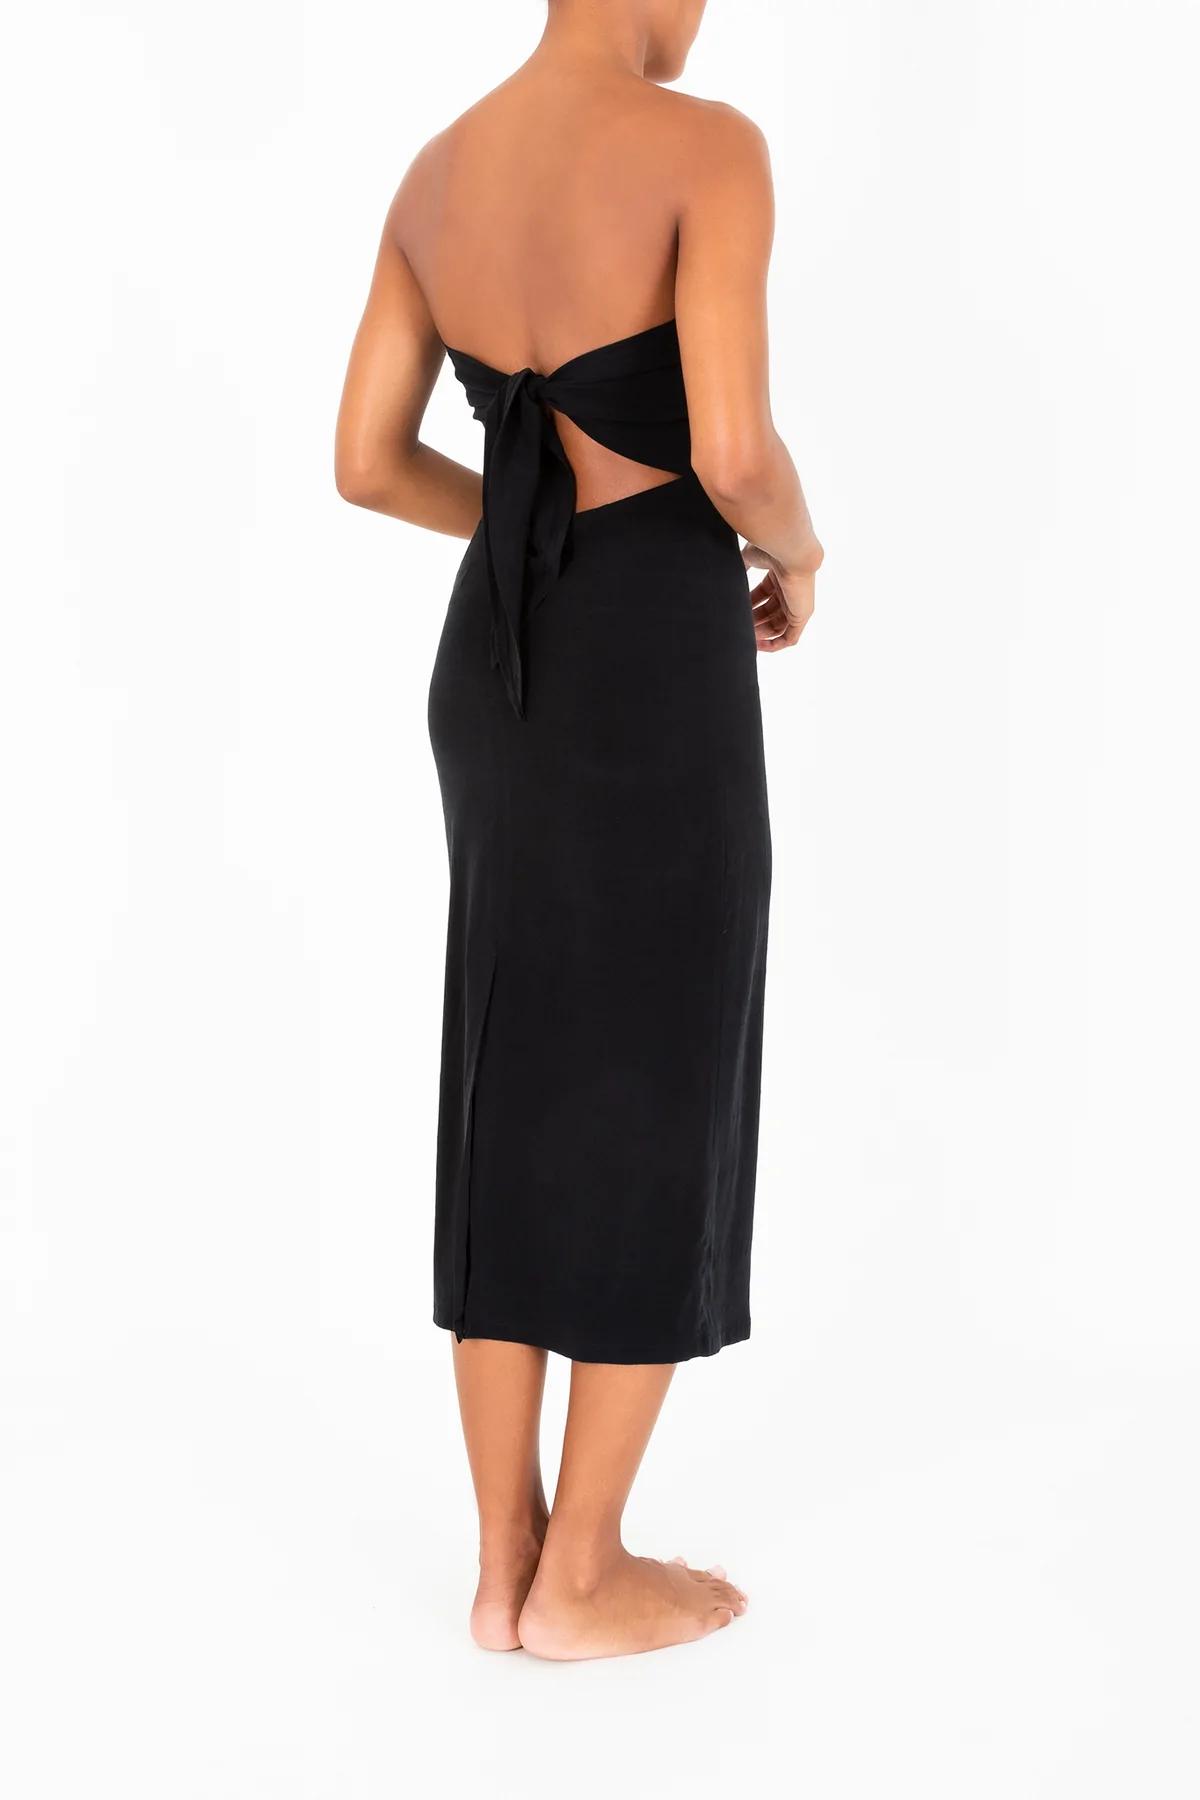 Product Image for Strapless Tie Back Midi Dress, Black